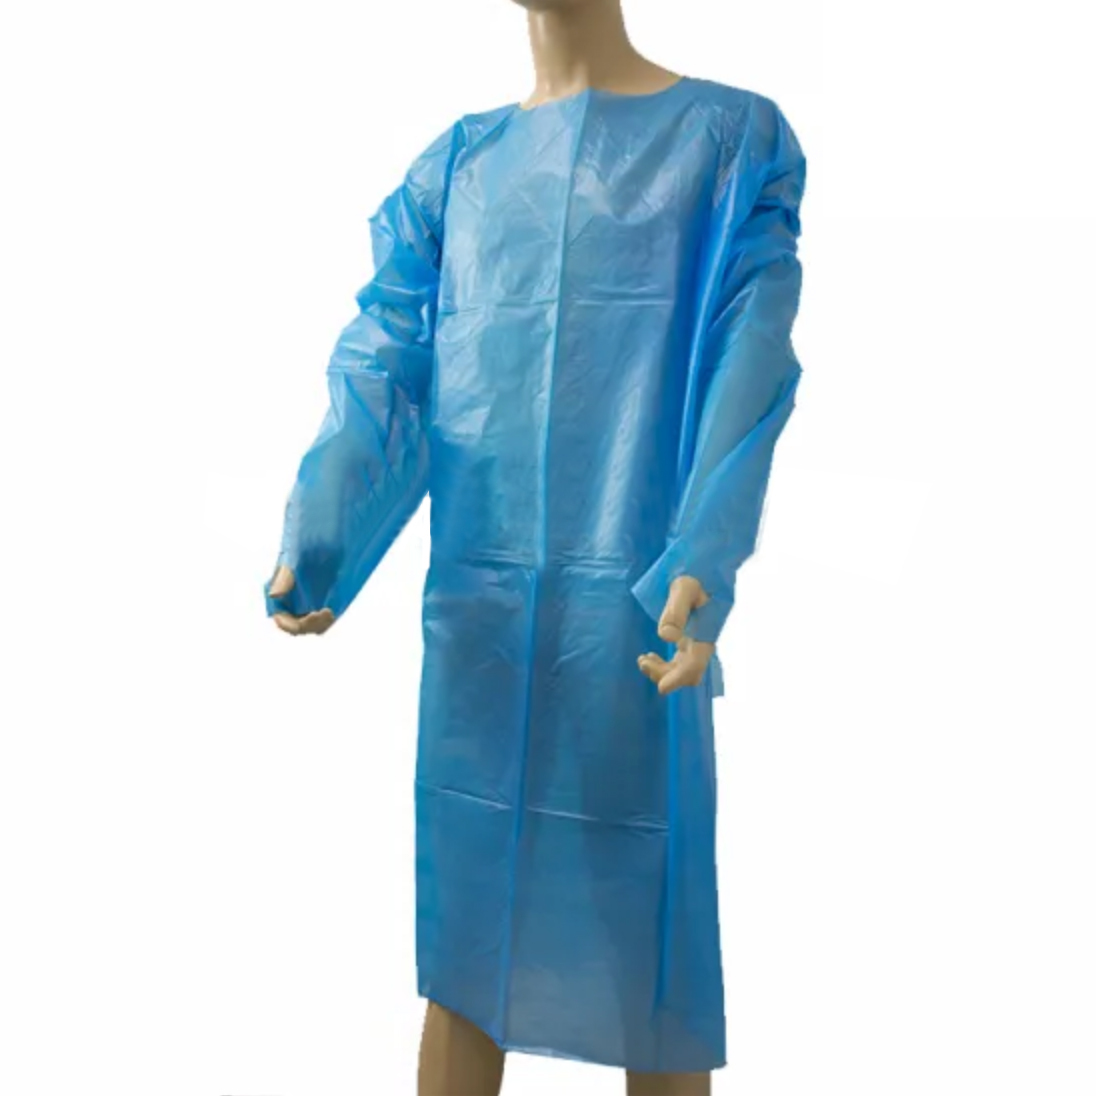 BodyMed Non-Surgical Isolation Gown - Click to Shop